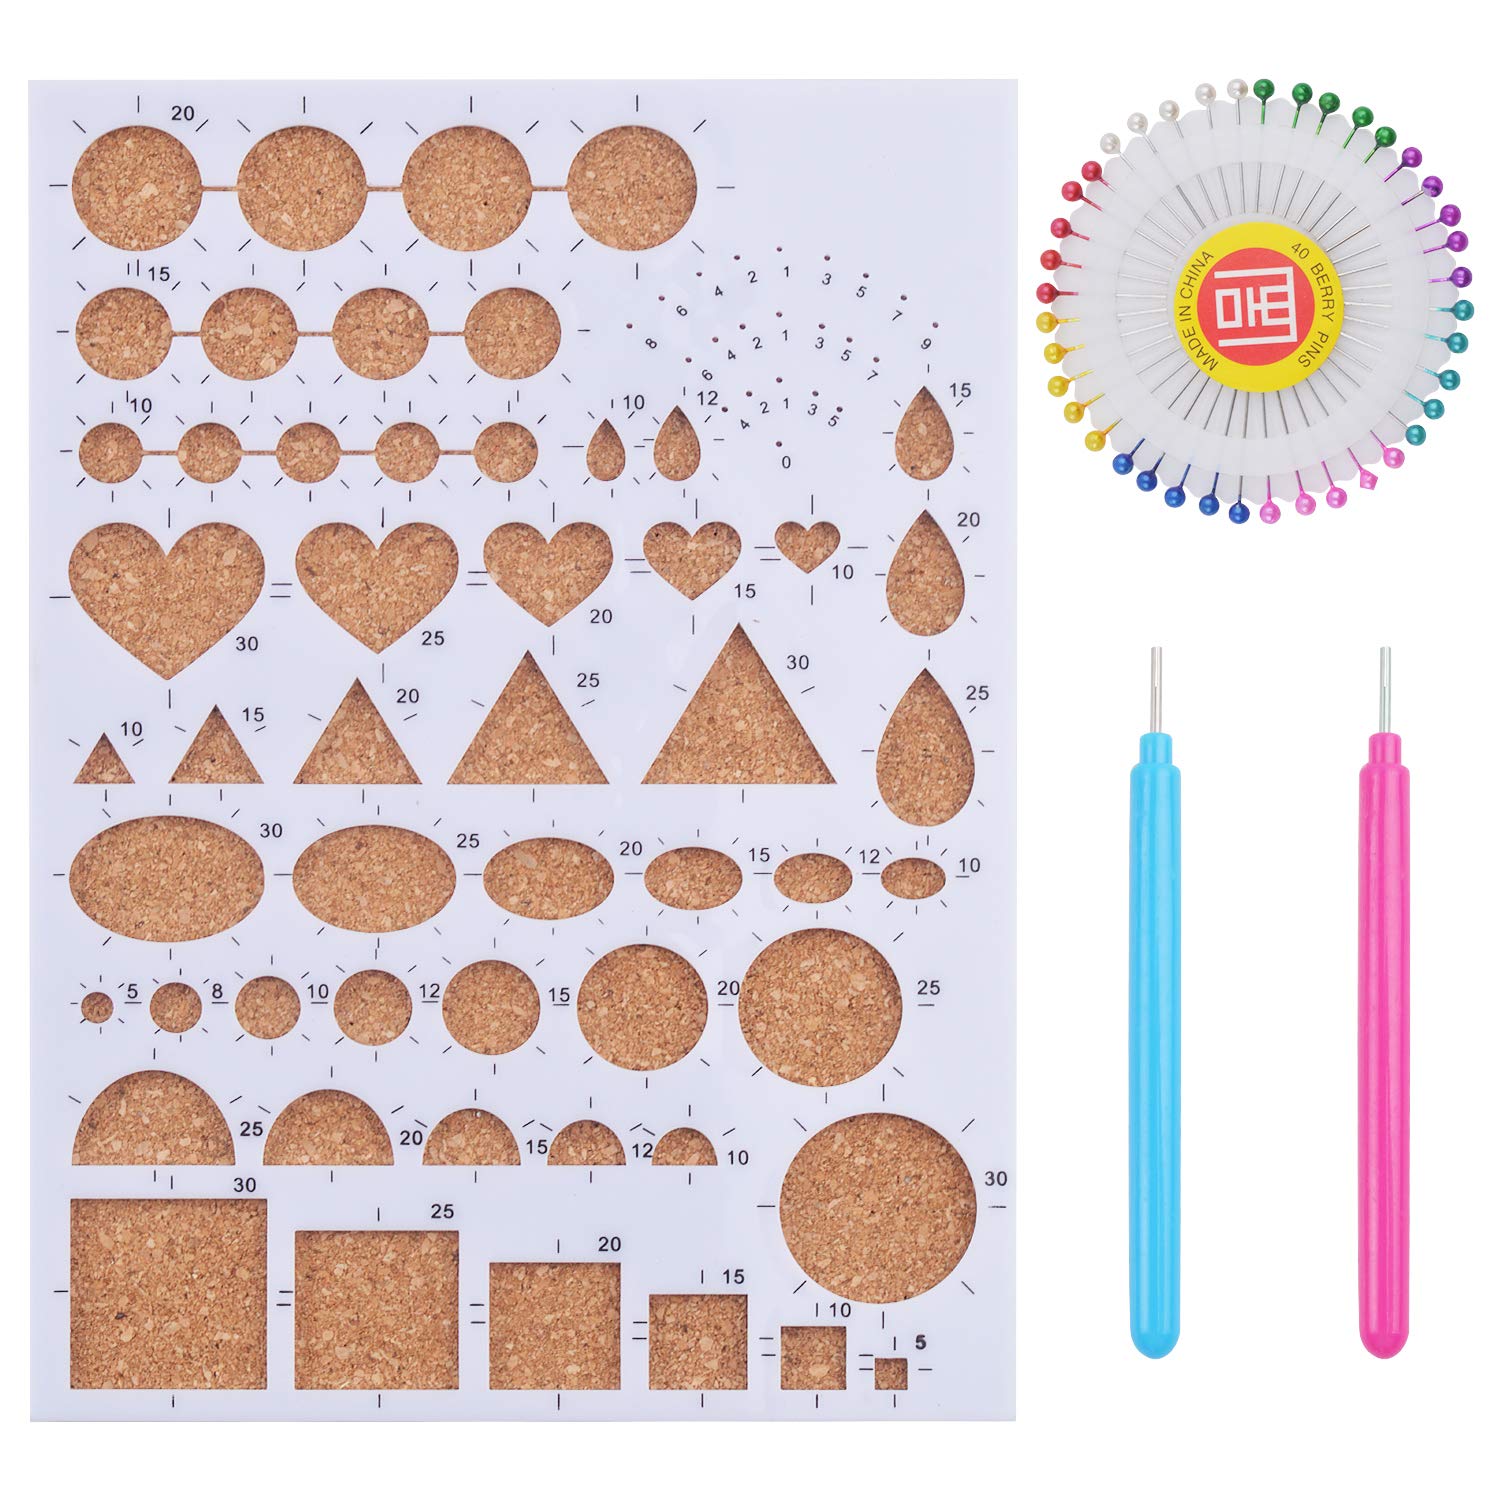 Paper Quilling Kit,Crimper,Slot,Comb,Dome mould mold,Board,Glue,Jewellery  Making